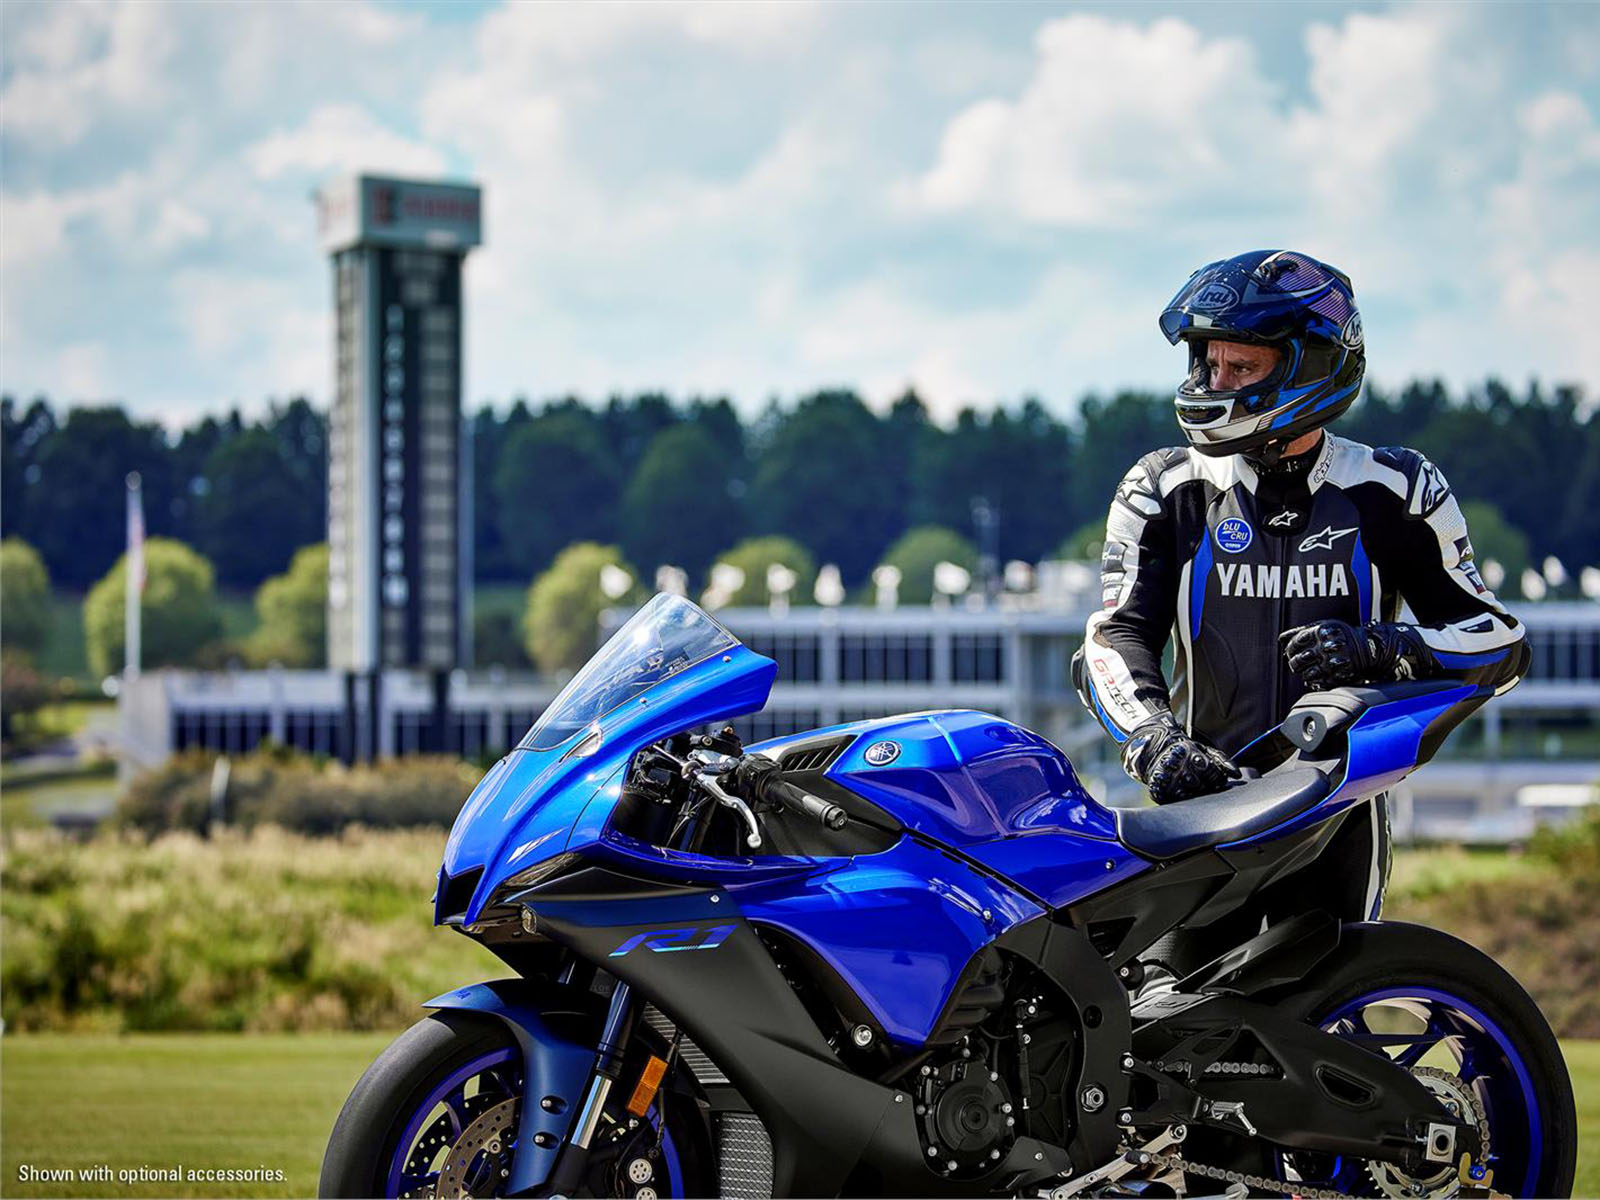 2022 Yamaha YZF-R1 in Clearwater, Florida - Photo 11